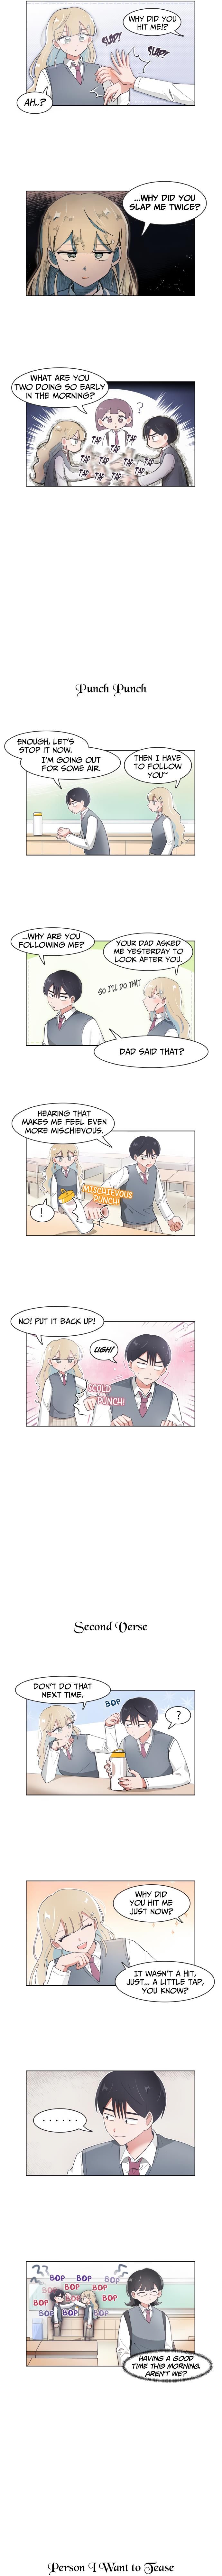 I Only Want to Beat You chapter 97 page 4